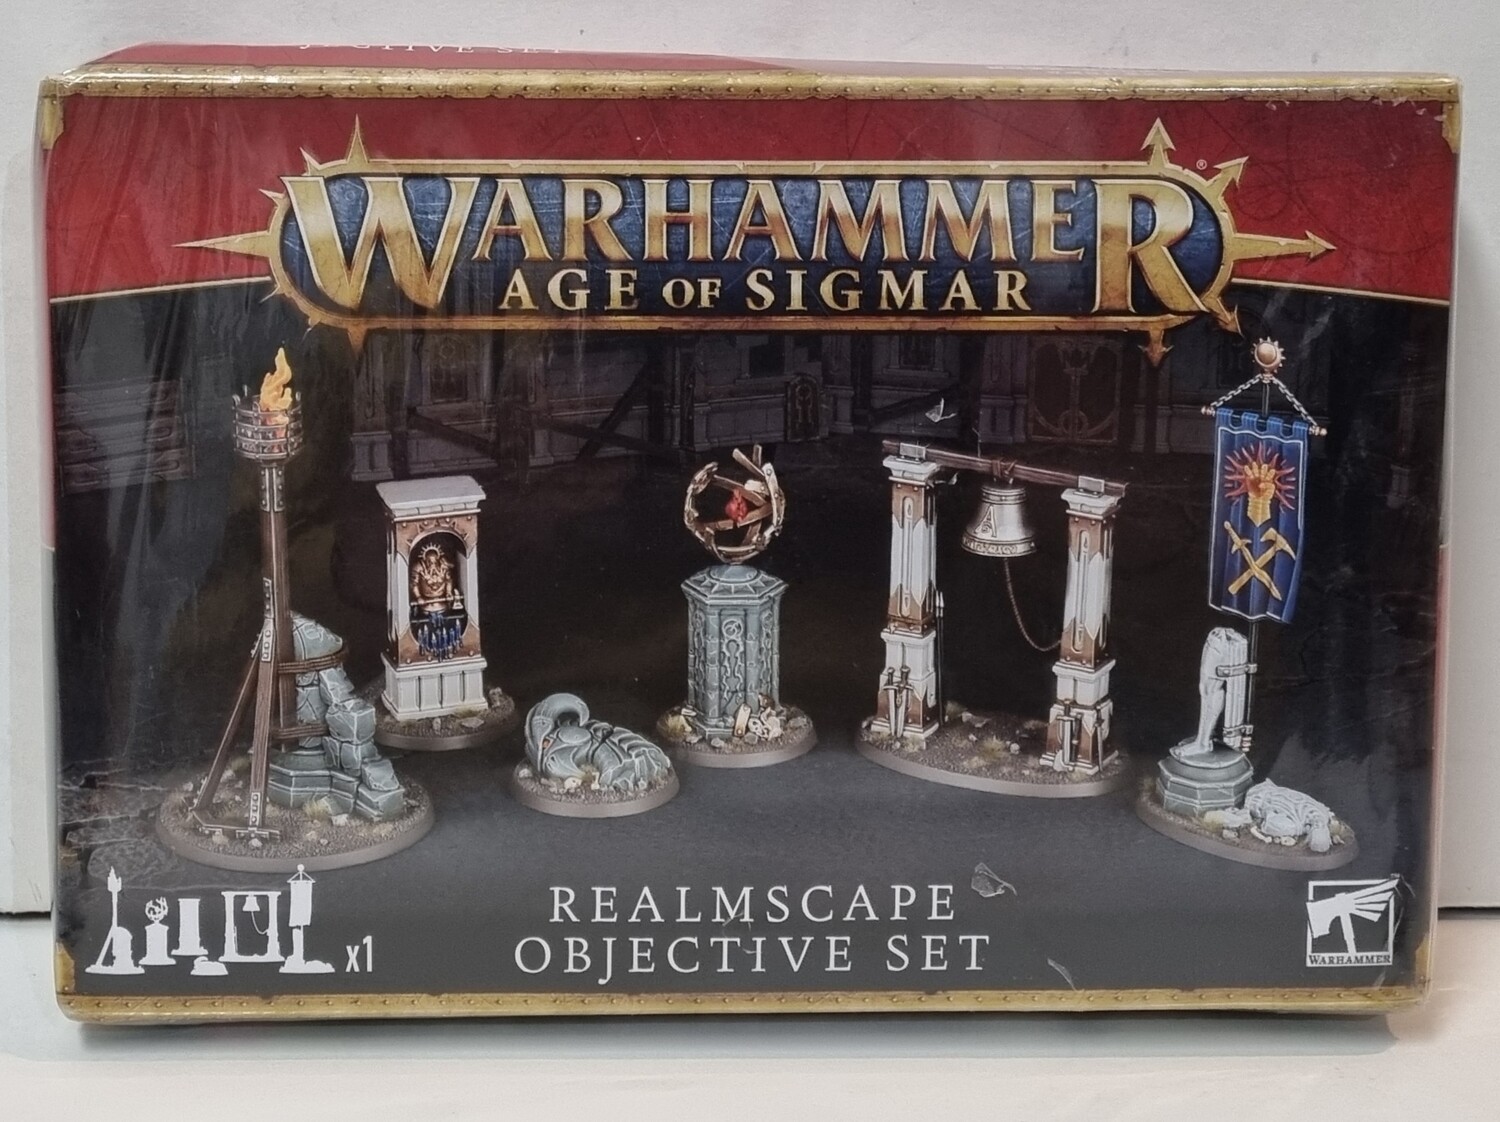 Warhammer, Age of Sigmar, 65-16, Realmscape: Objective Set